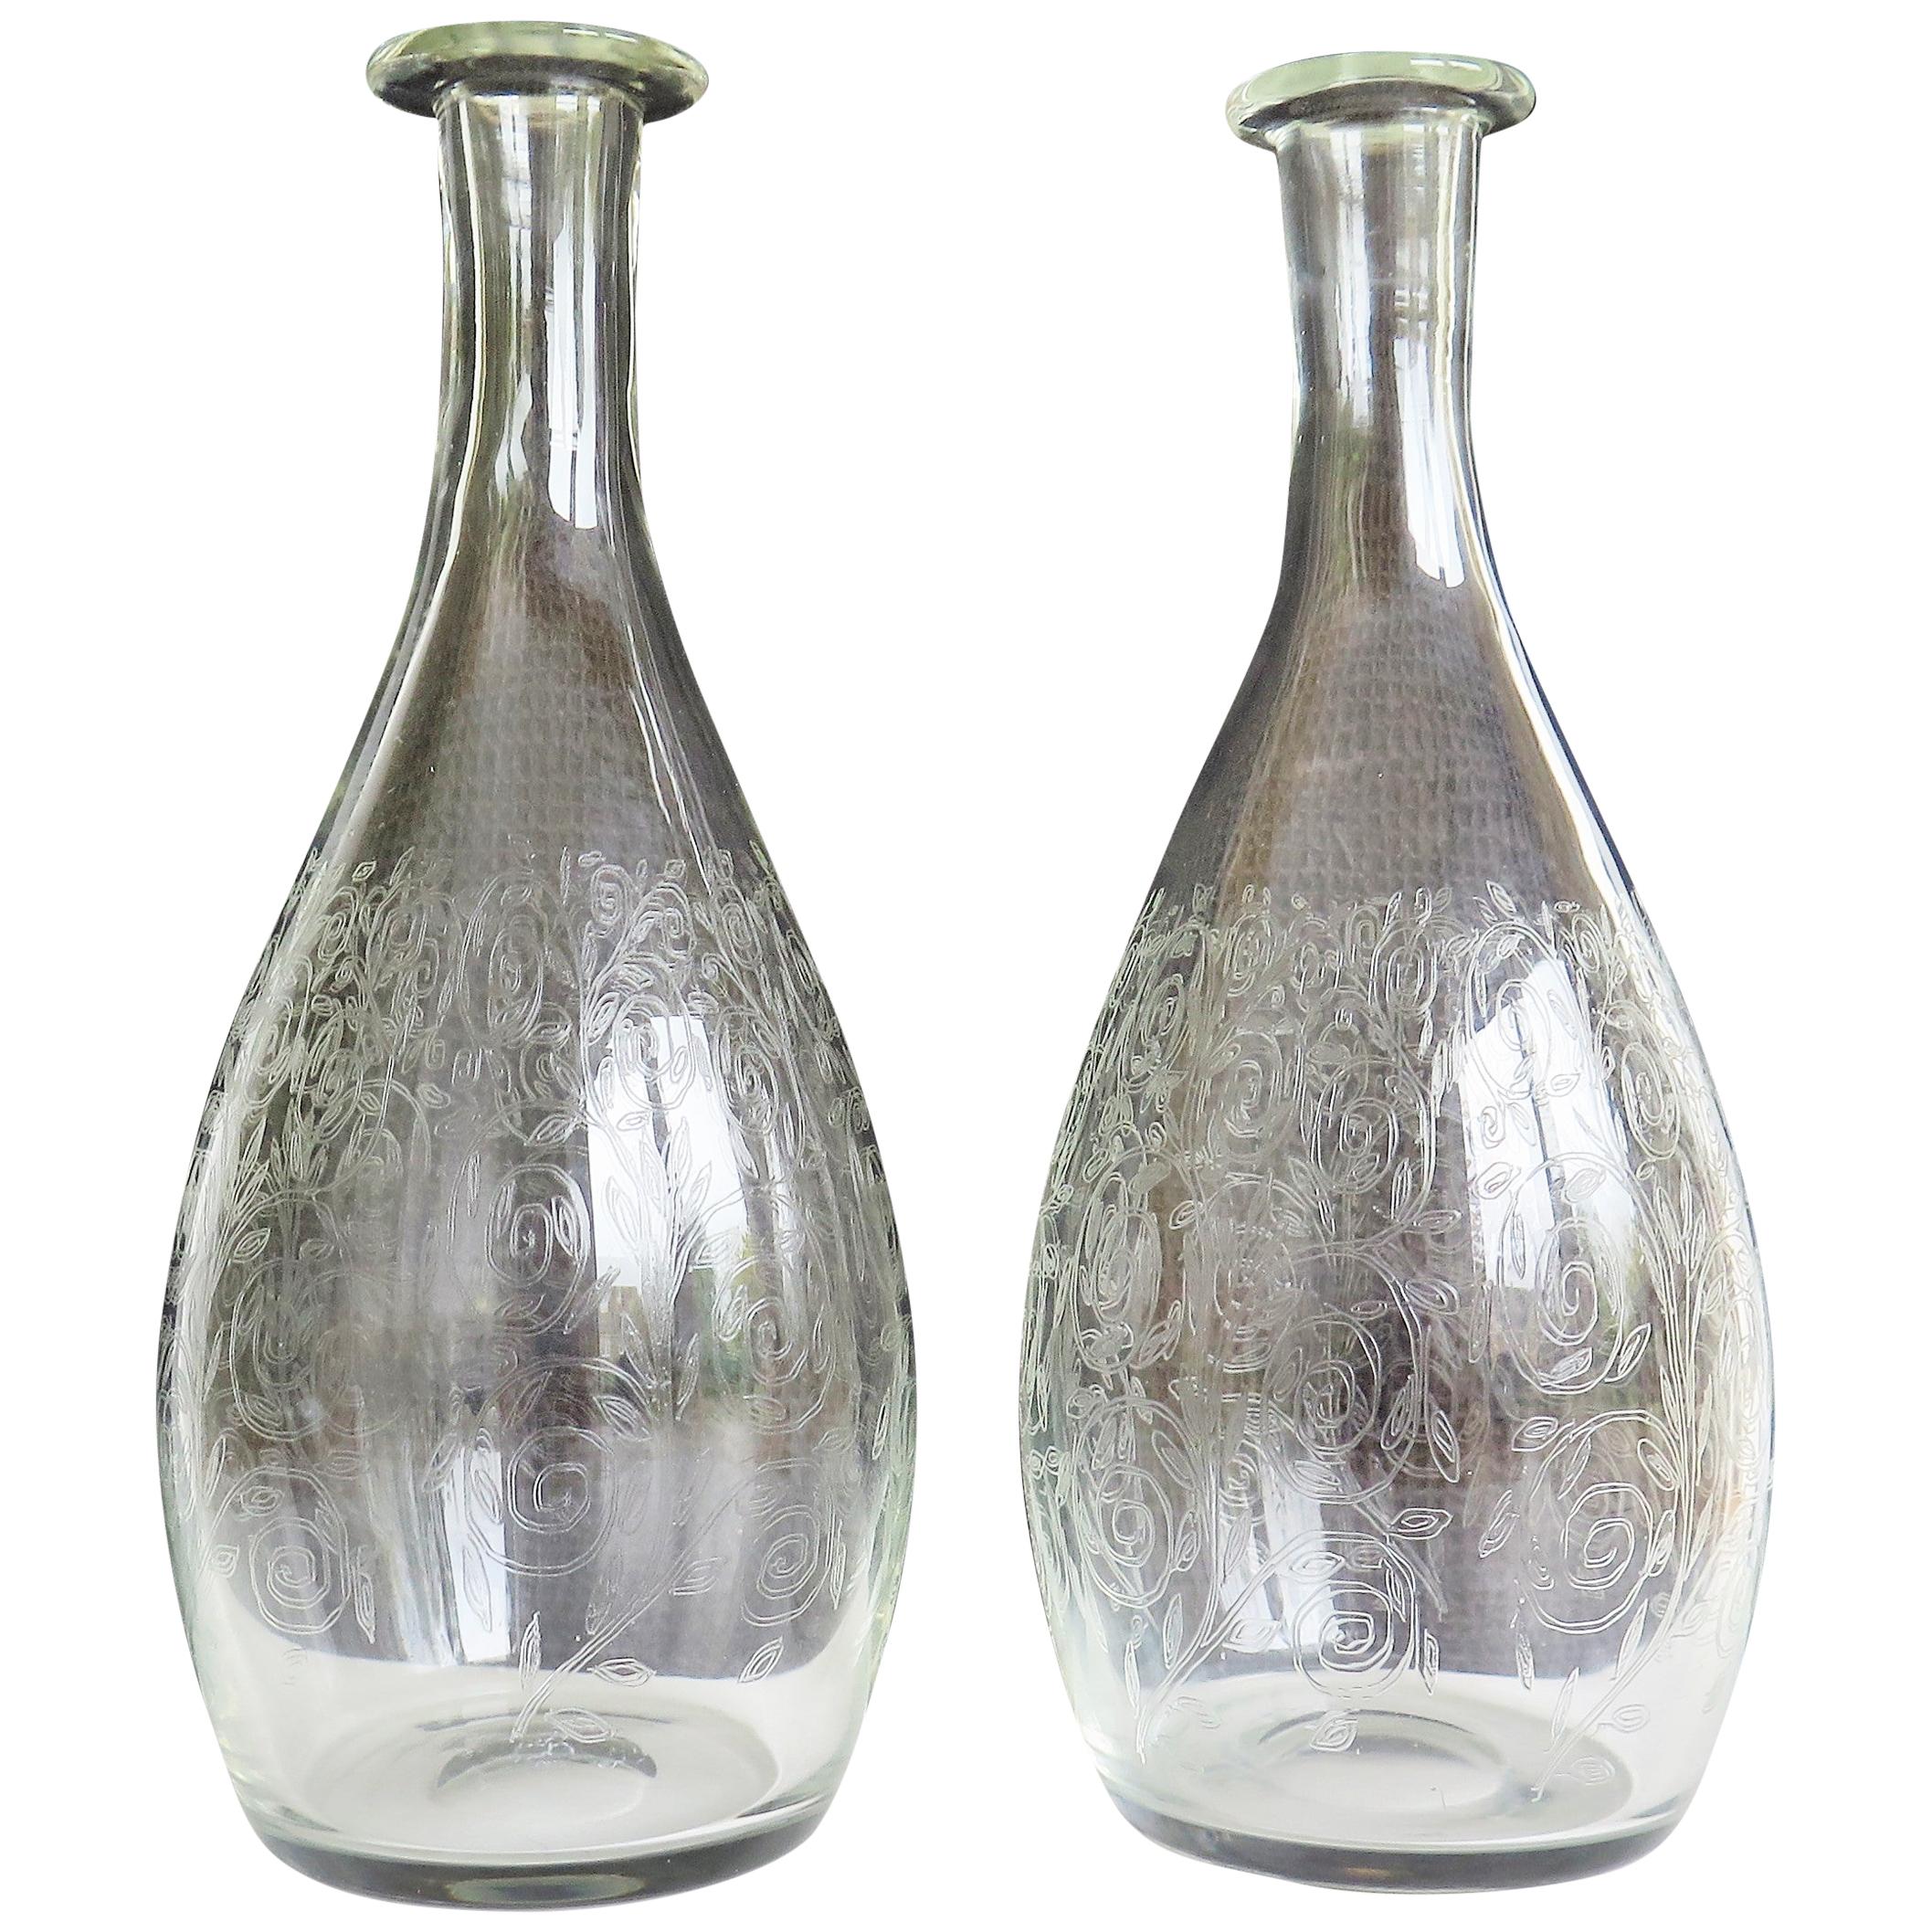 Fine Pair 19th C. Lead Crystal Glass Carafes or Decanters Hand Blown & Engraved